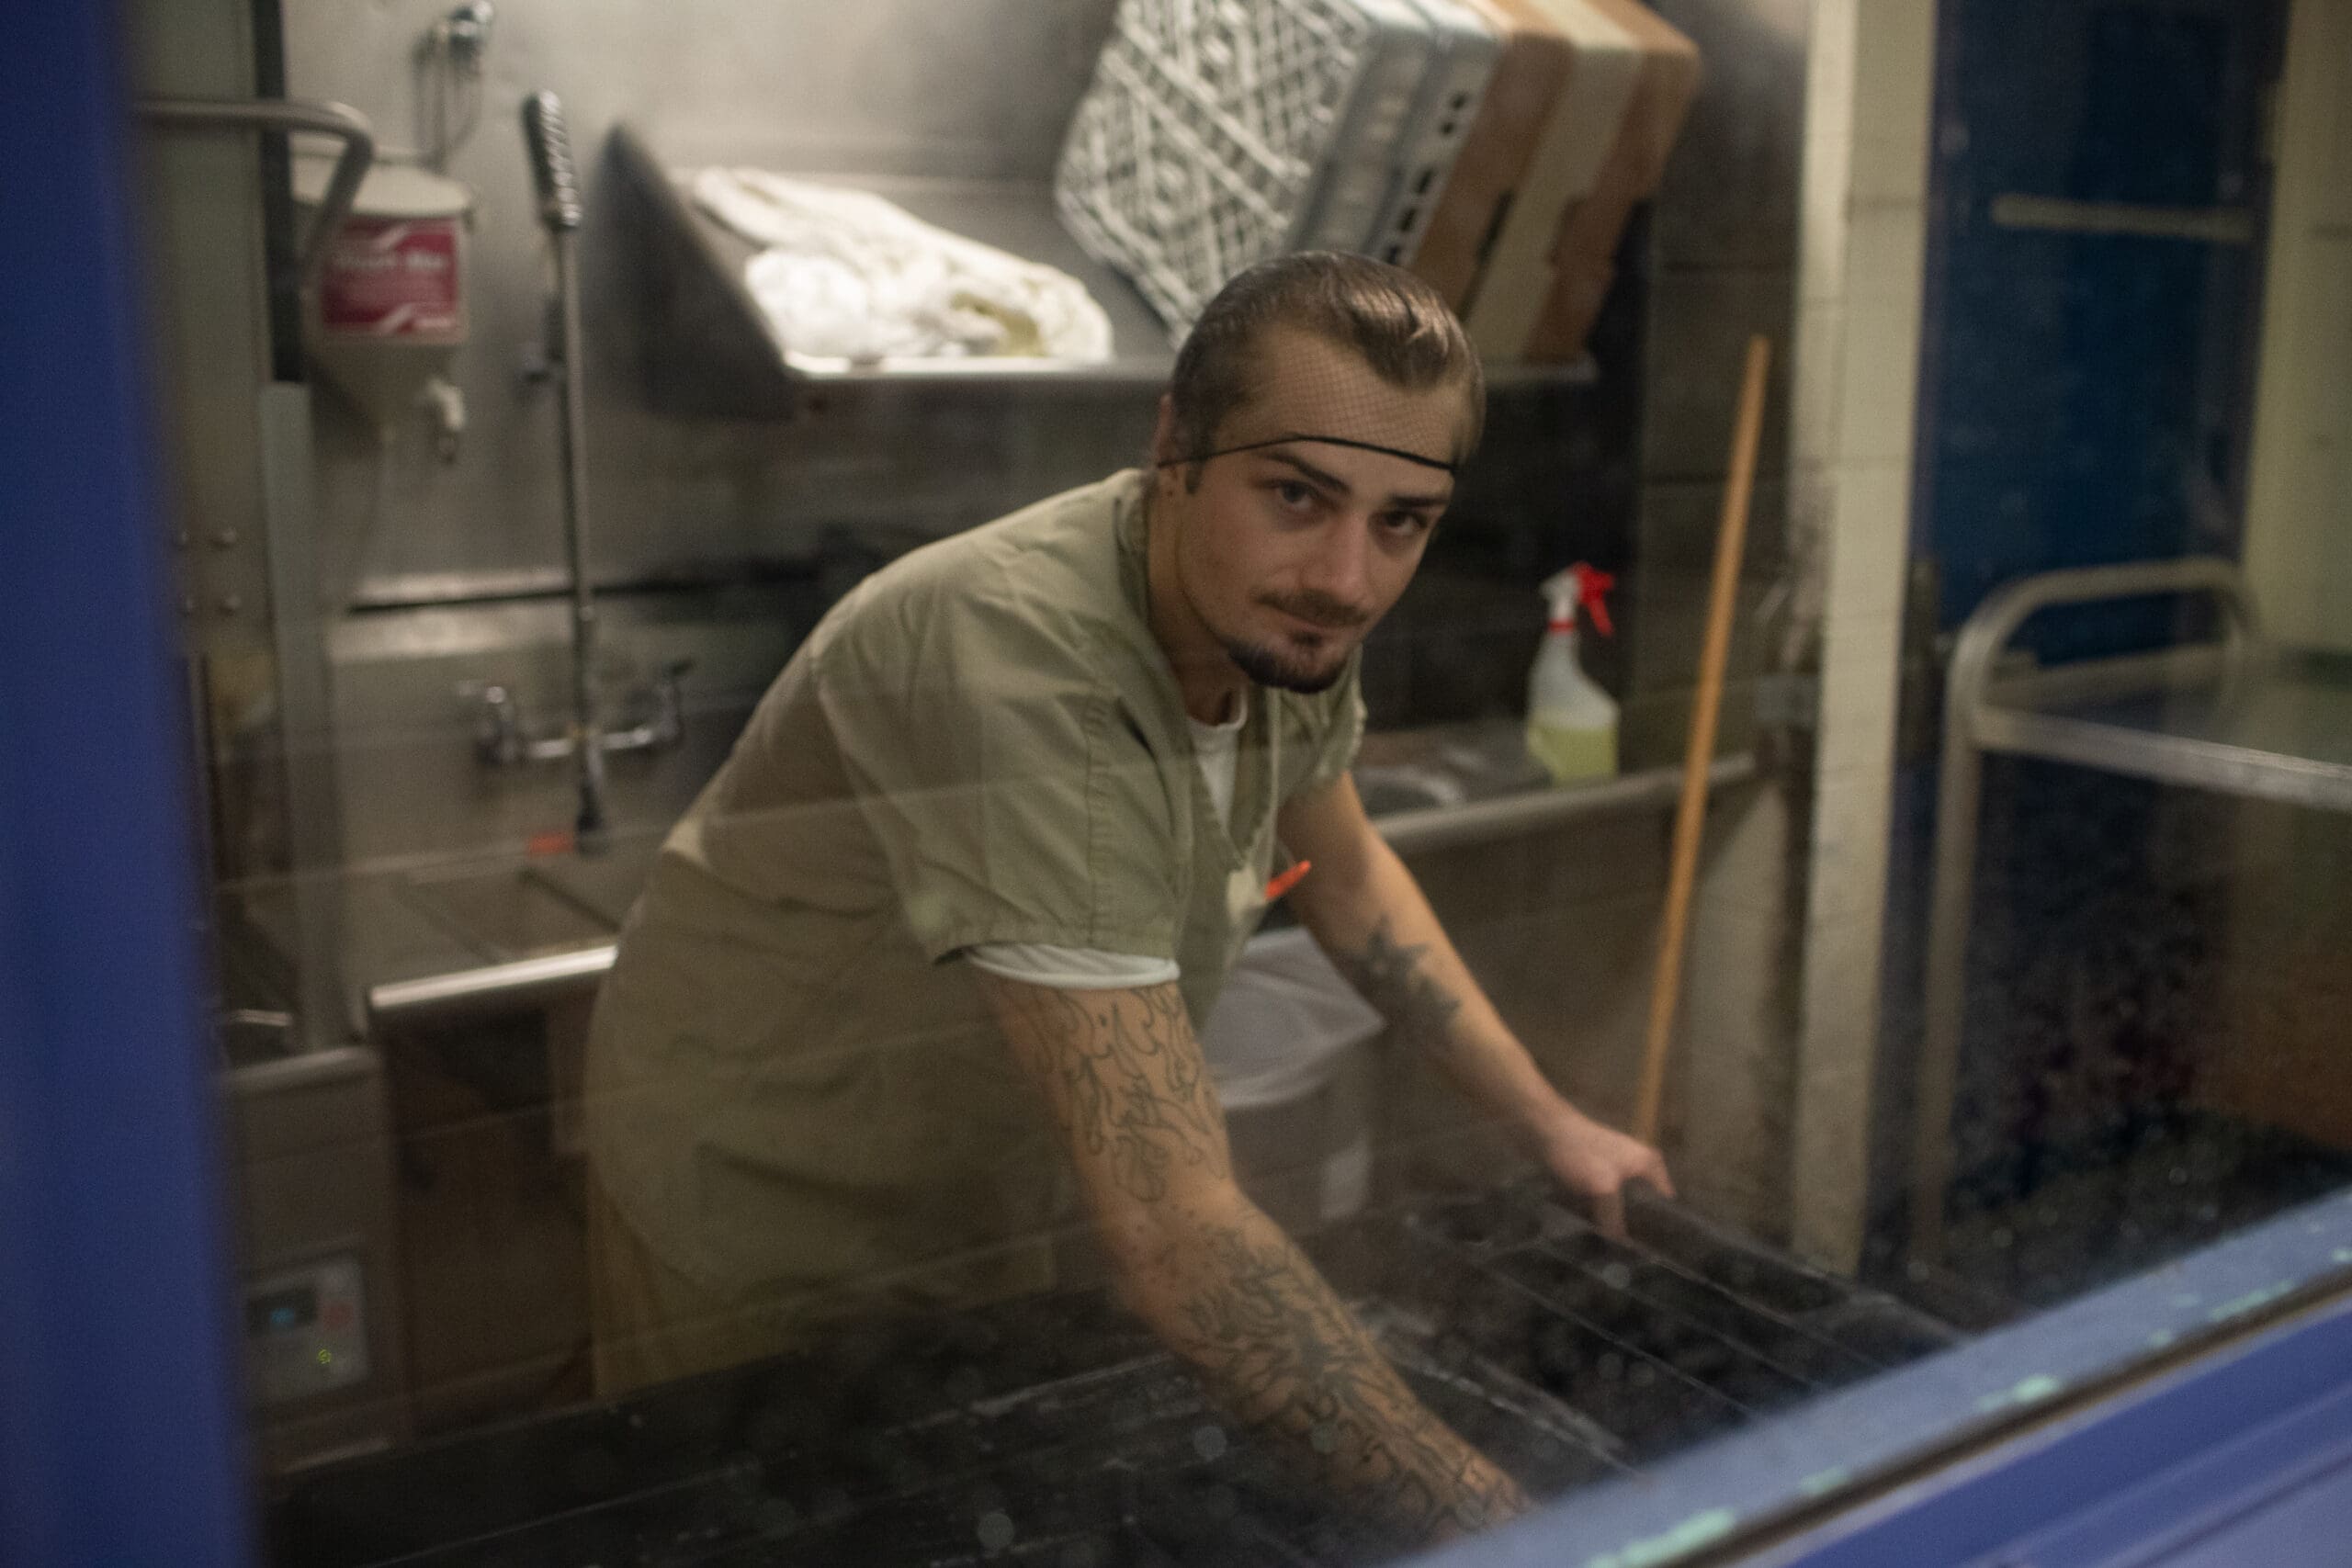 An inmate sanitizes a food cart in the jail kitchen which has black mold growing on the walls and ceiling.